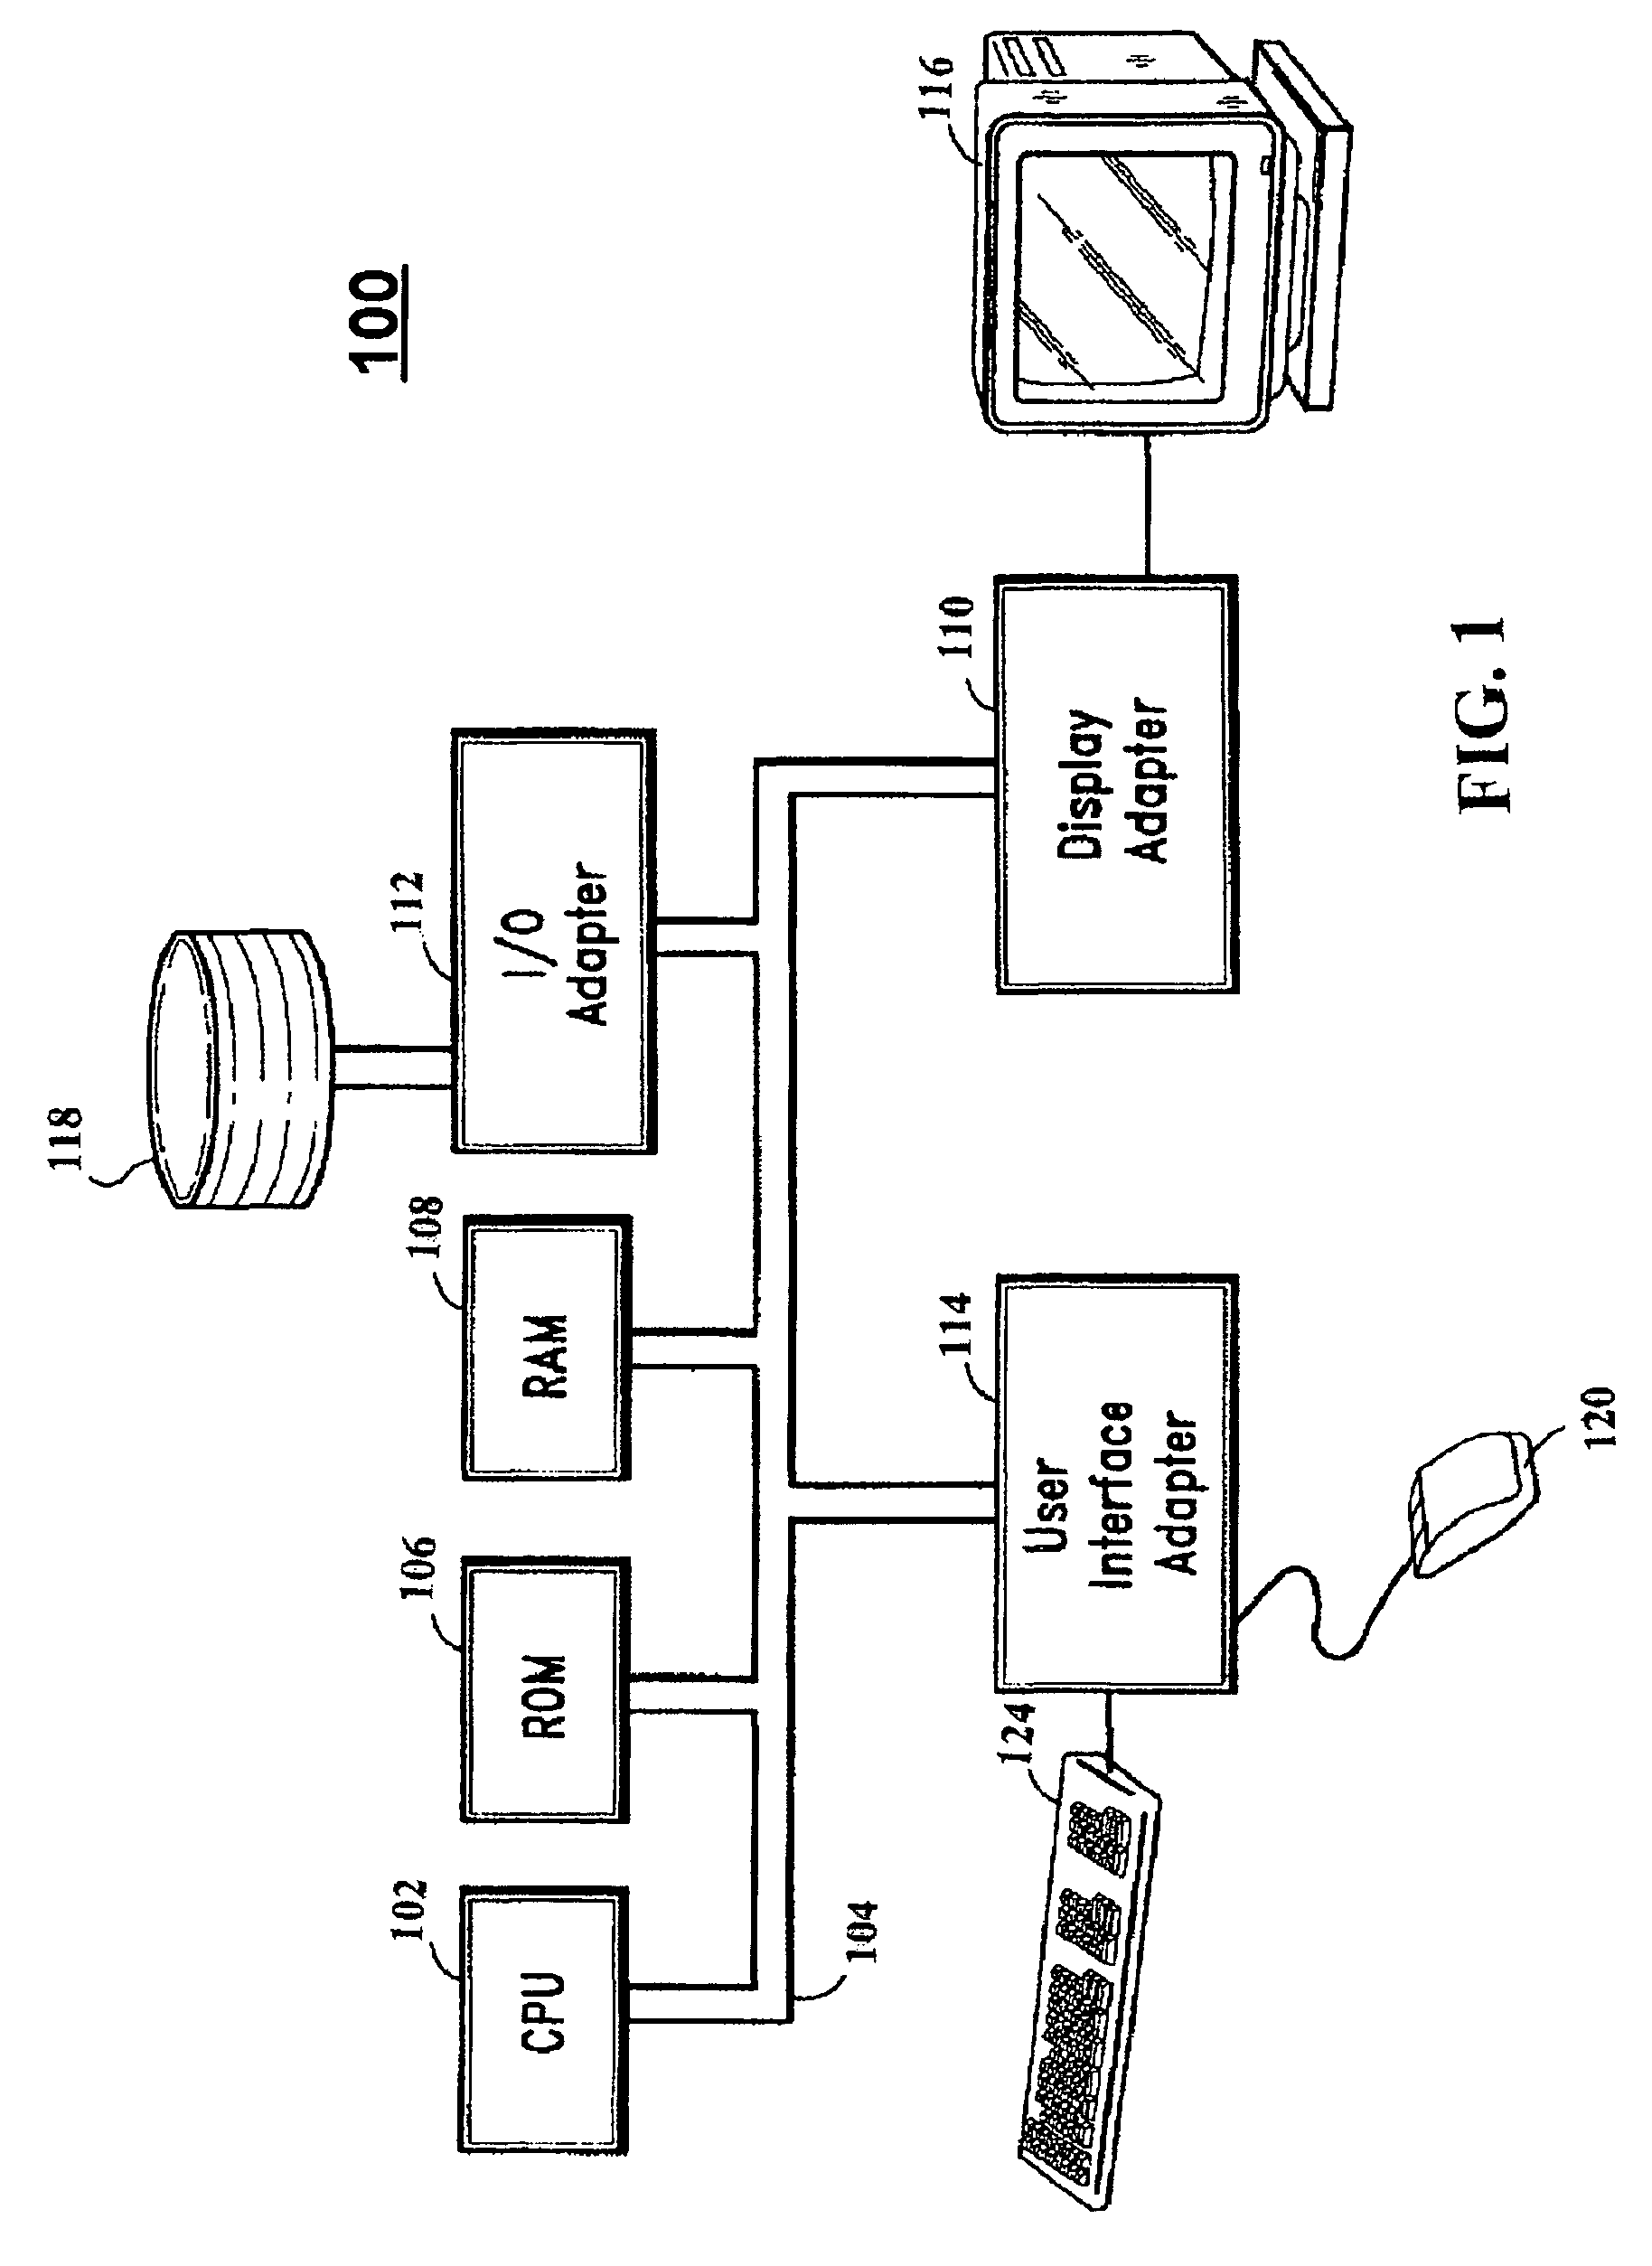 Method, system and product for determining standard Java objects